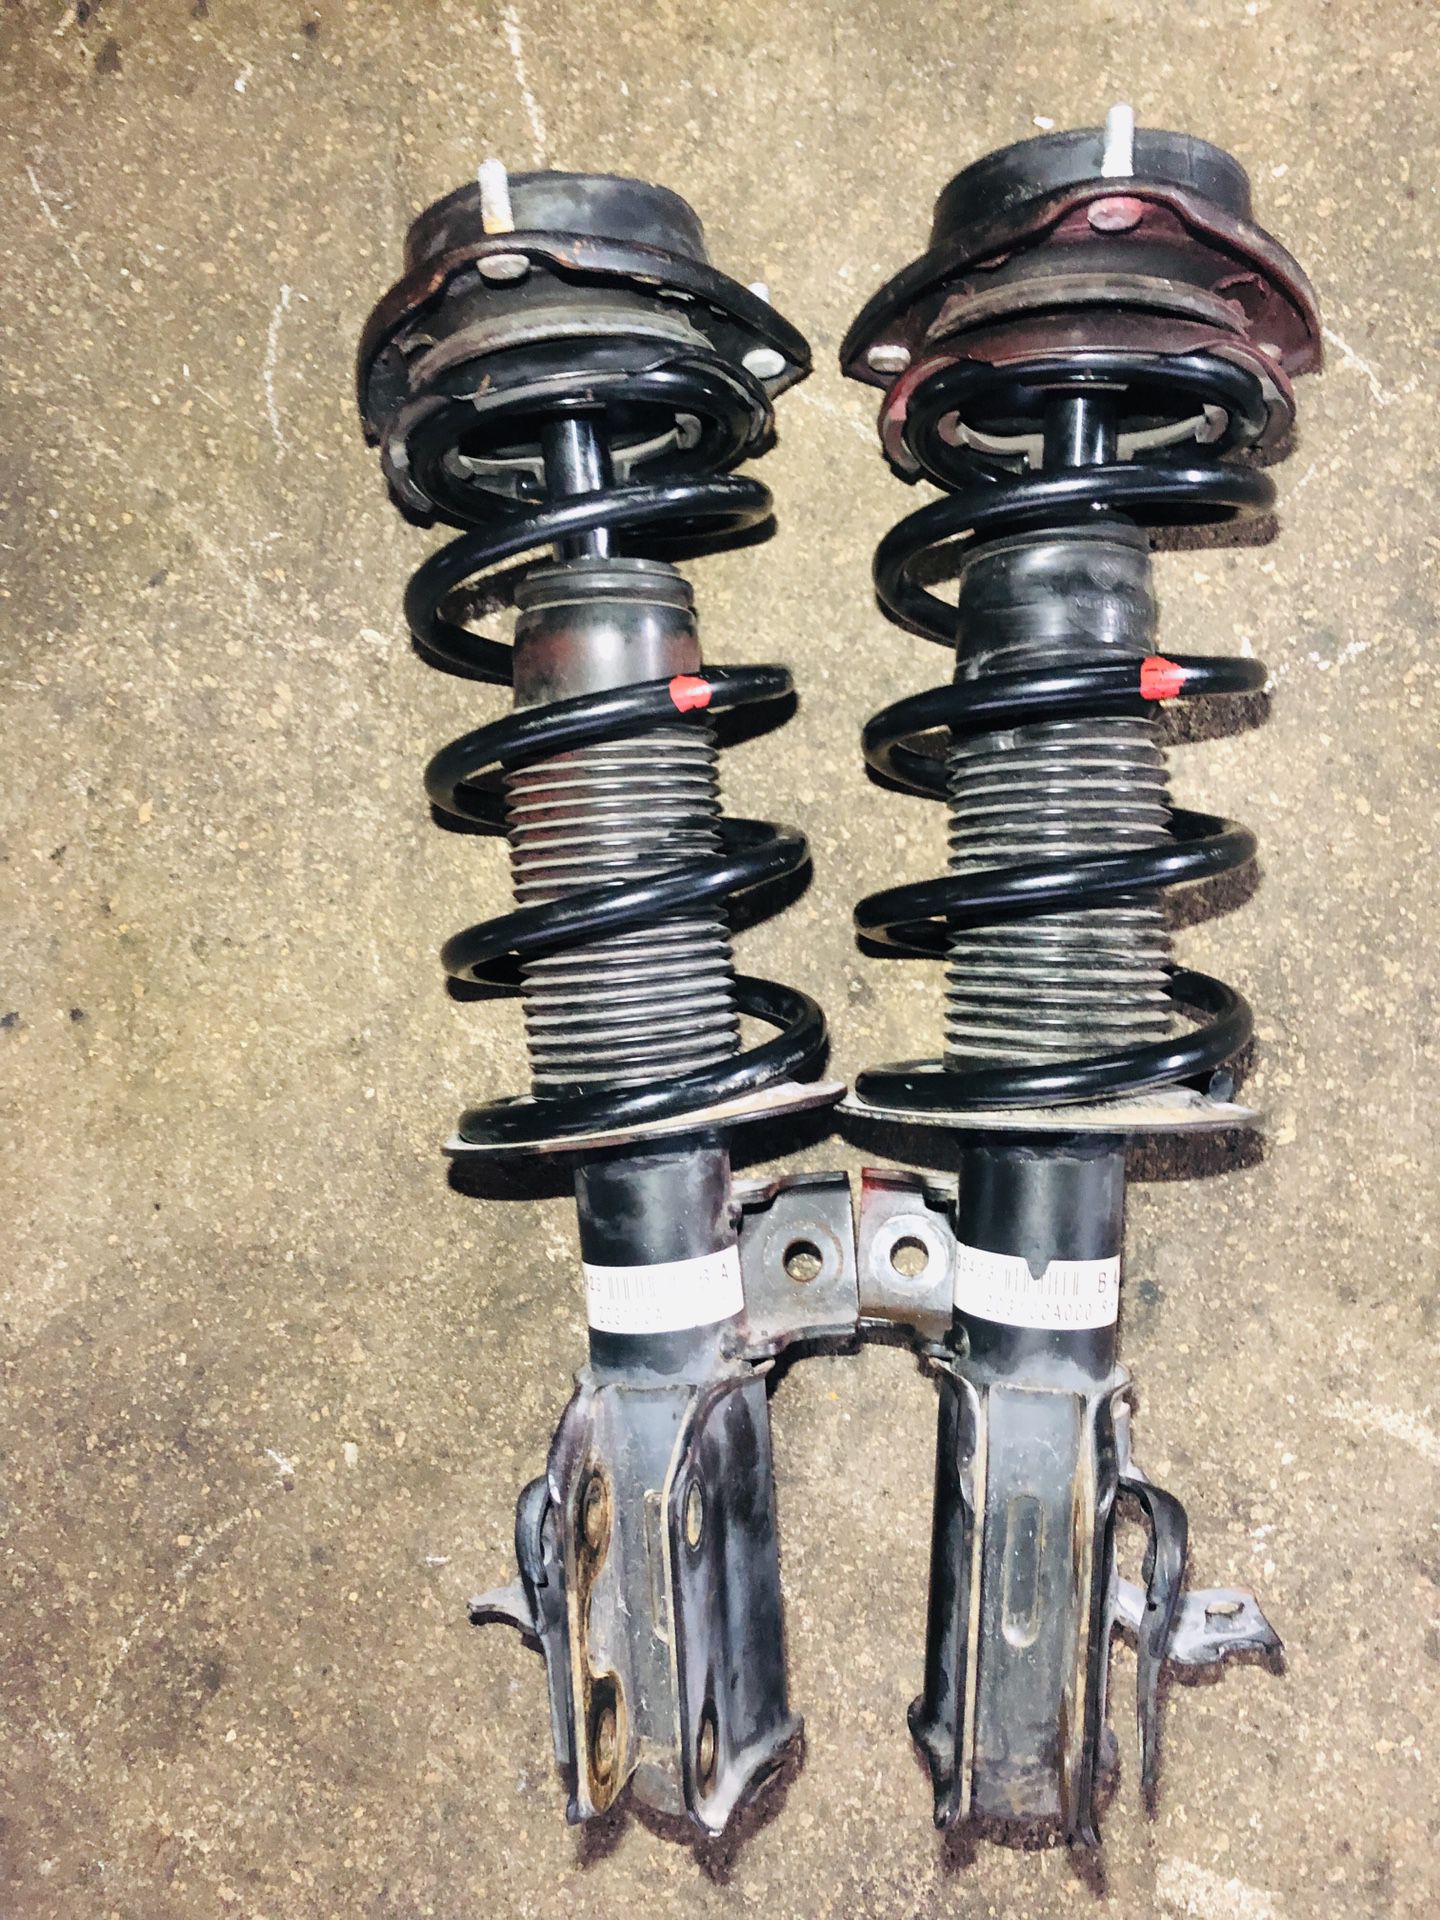 Scion FRS OEM Coilovers Springs and Shocks 12k on them still new